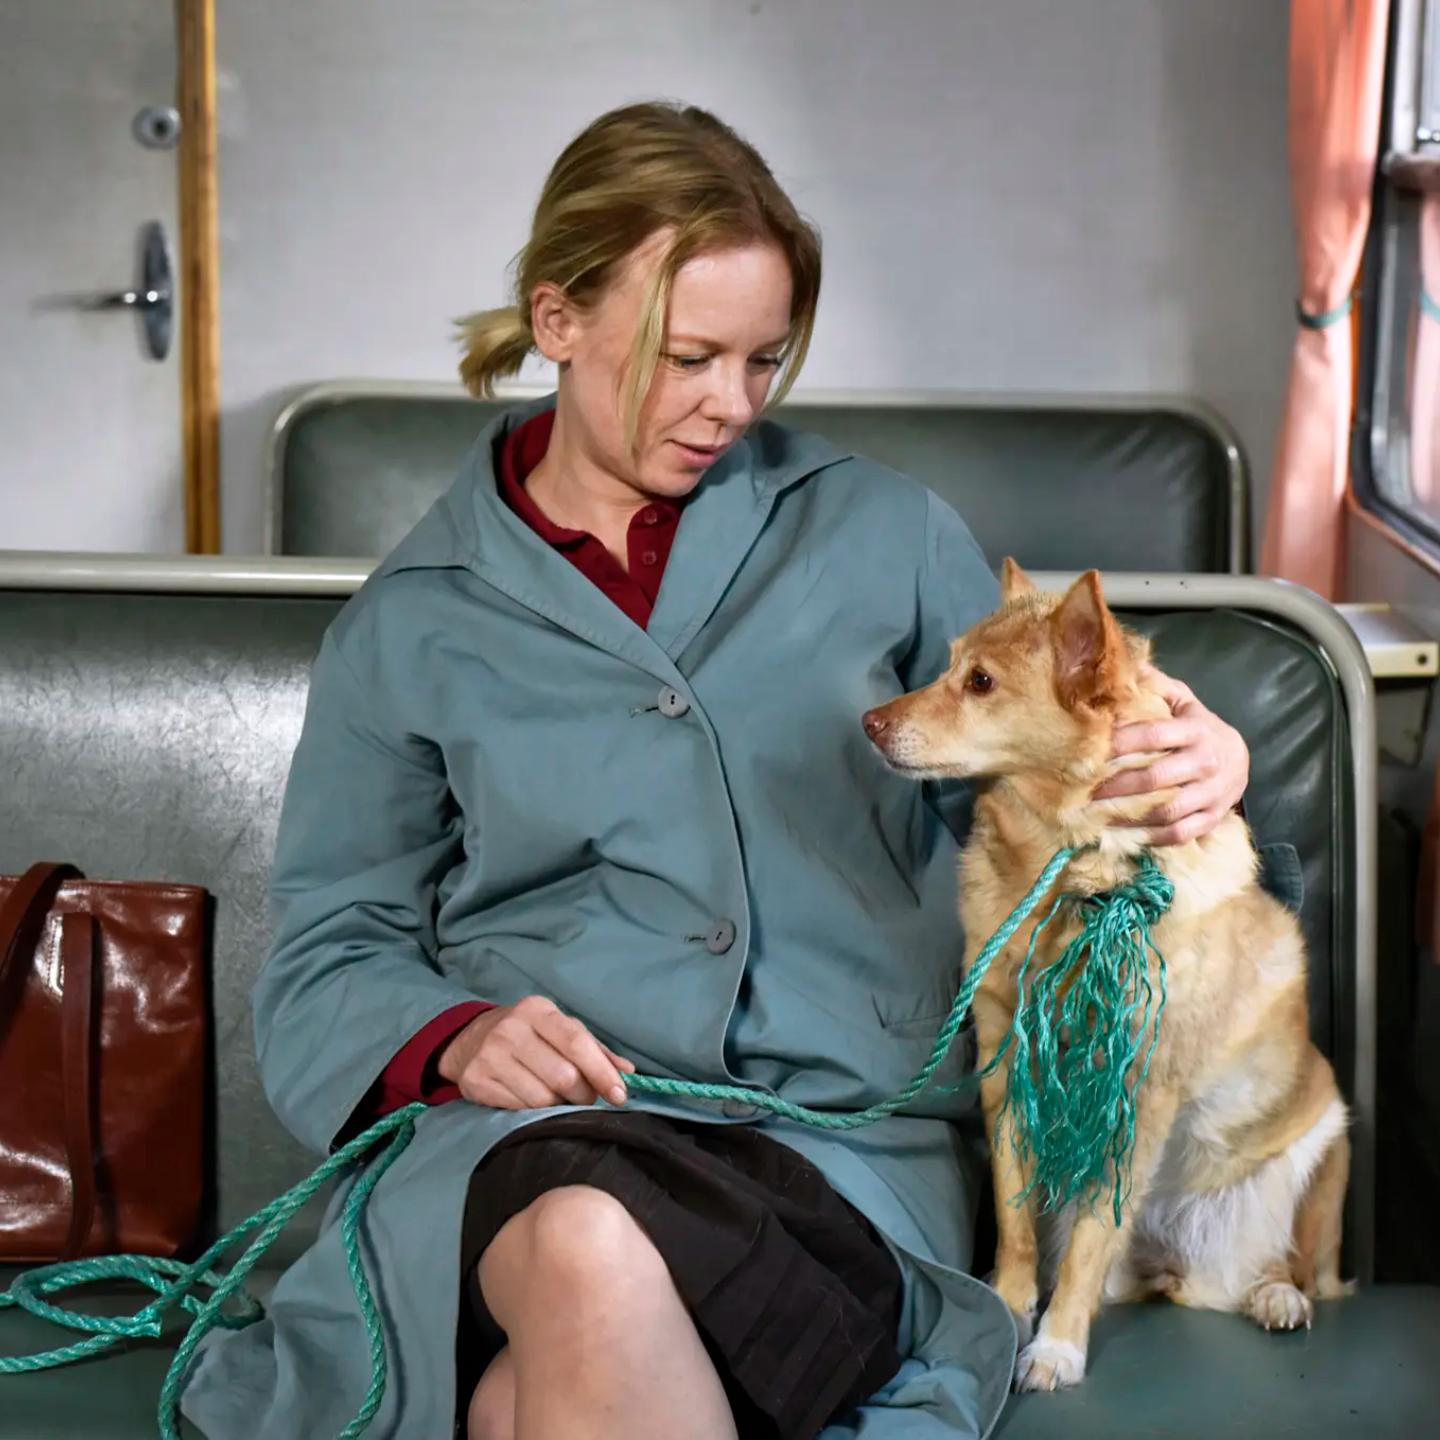 a person sitting on a bus with a dog